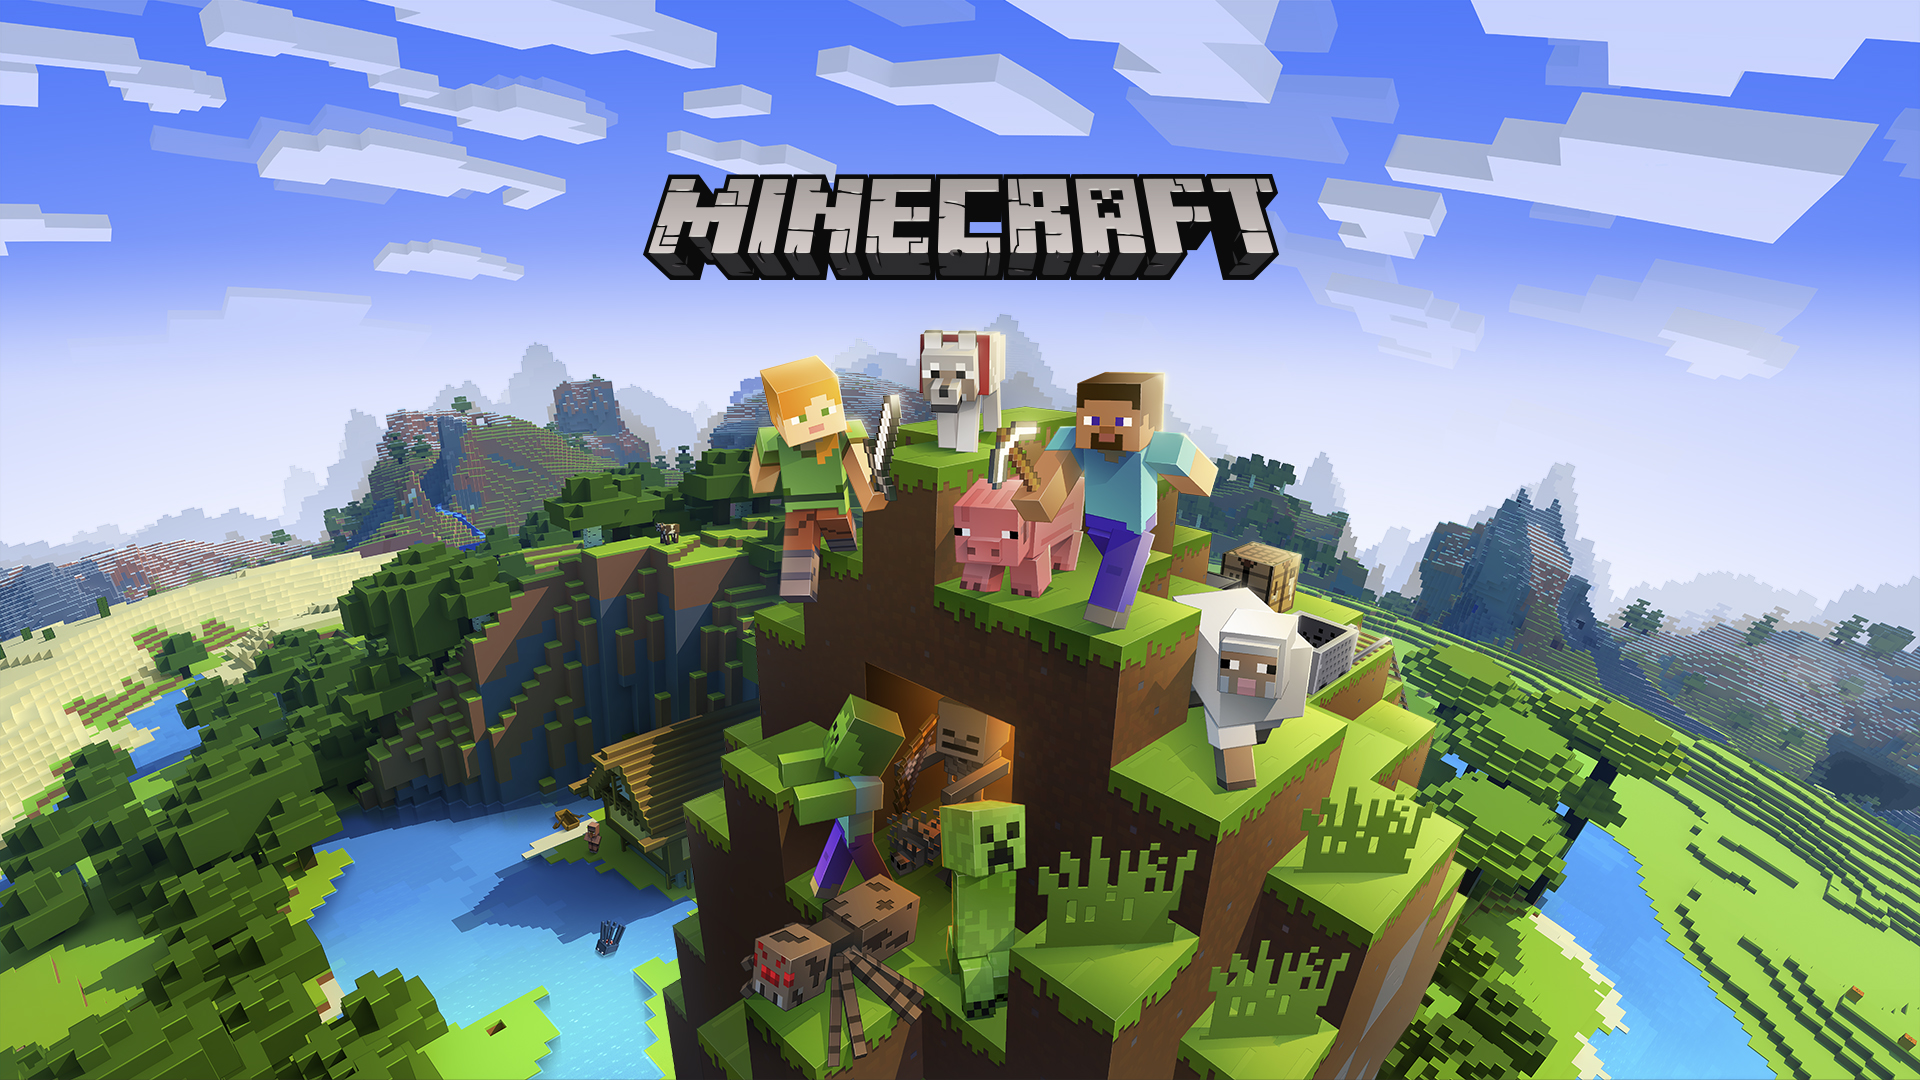 Promotional image for the game "Minecraft" that shows player characters, animals, and monsters on the top of a mountain in the middle of the screen. Mountains and a desert are visible in the background. 